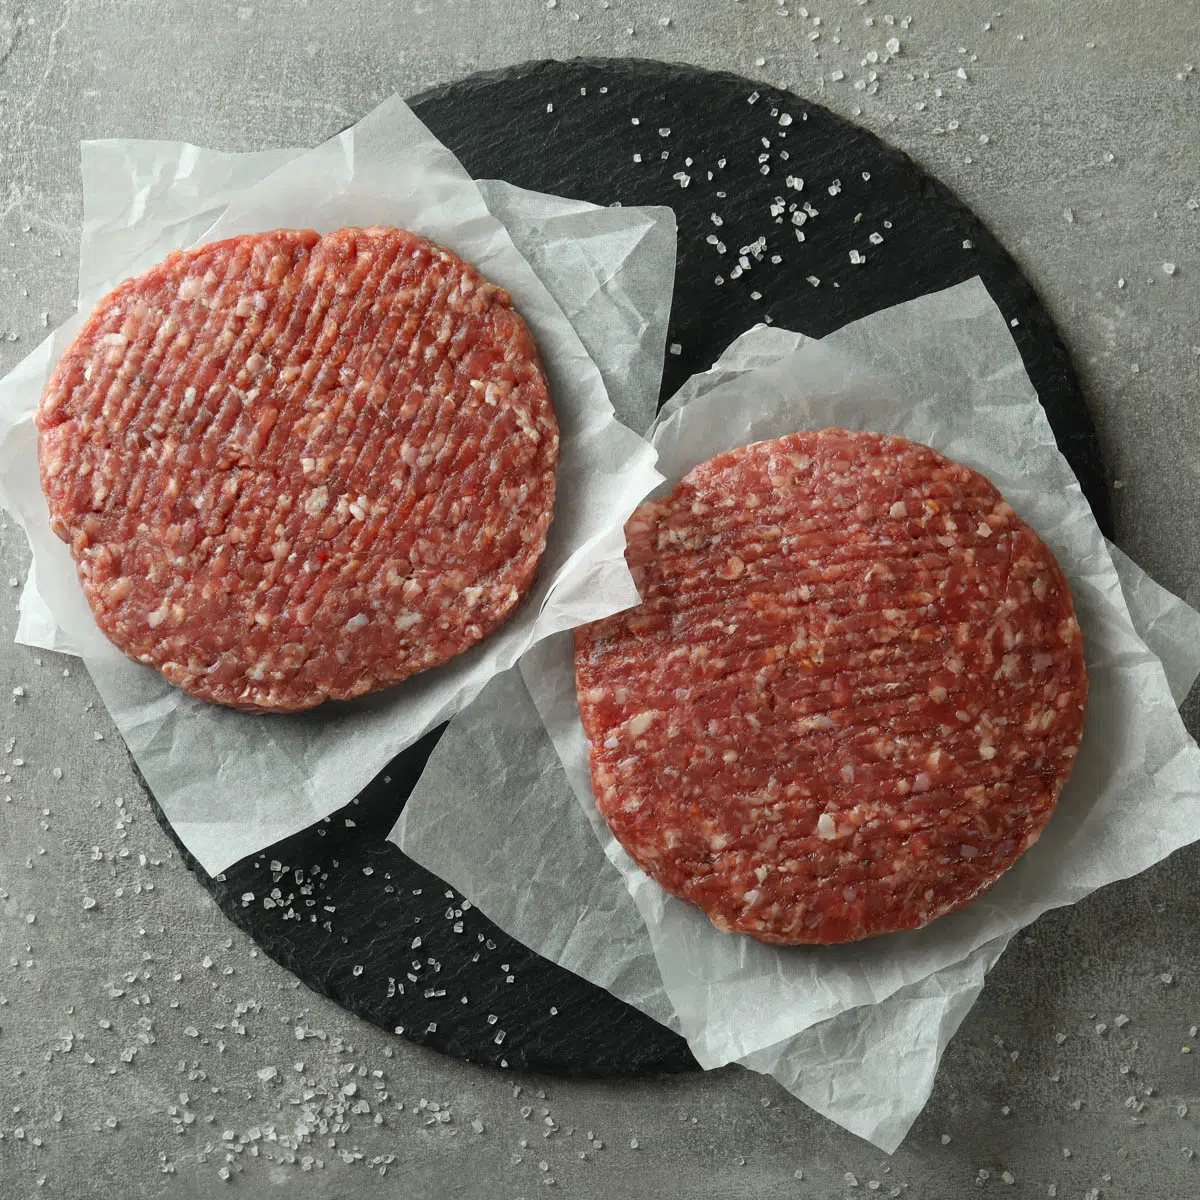 2 Burger patties on wax papers with sea salt sprinkled on the counter.